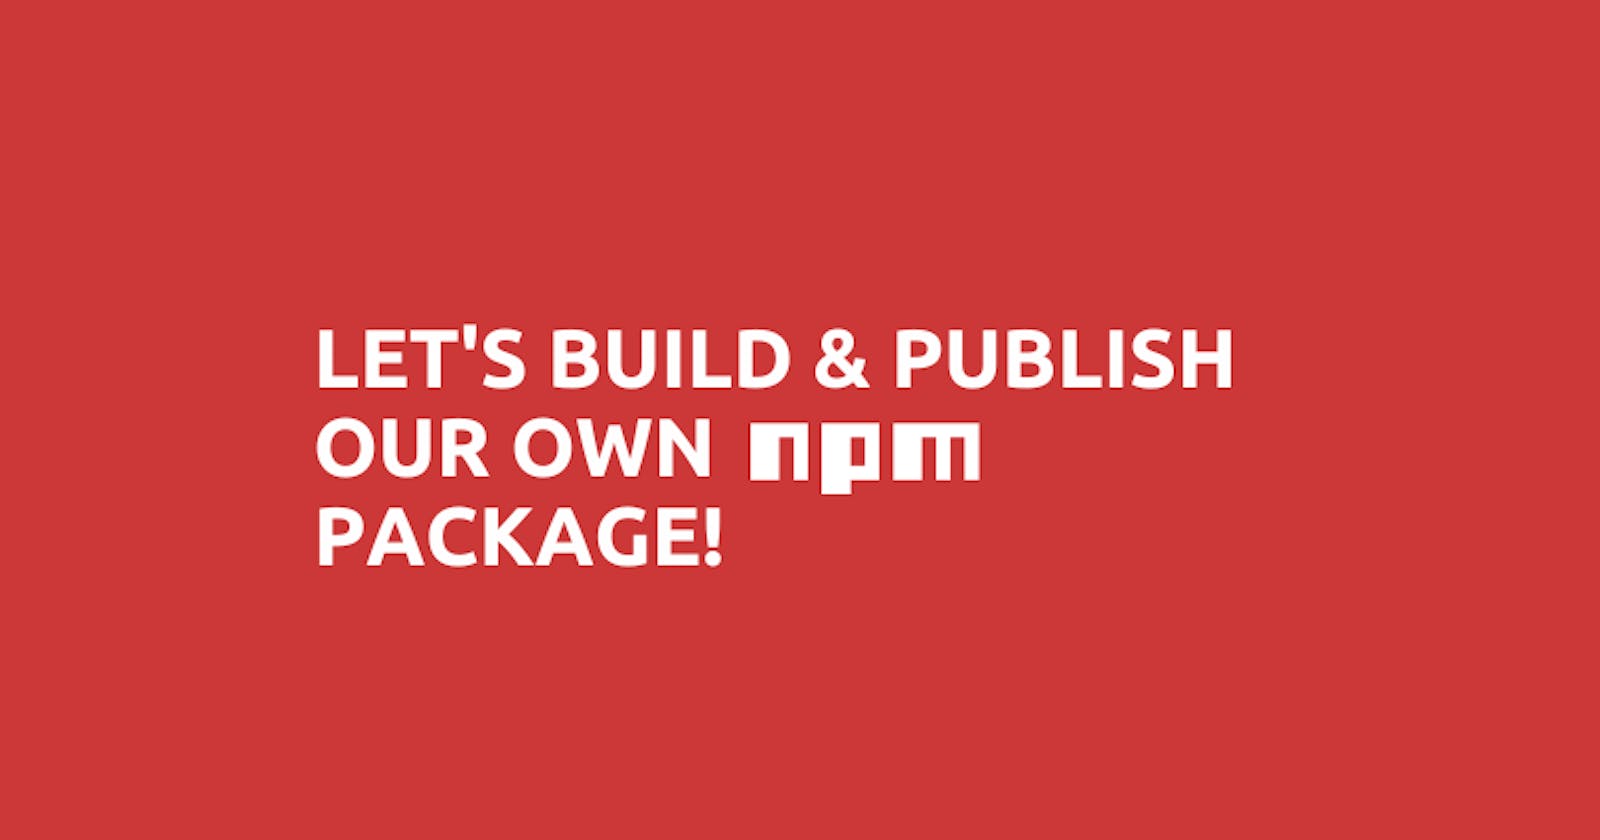 Let's Create & Publish Our Own NPM Package!